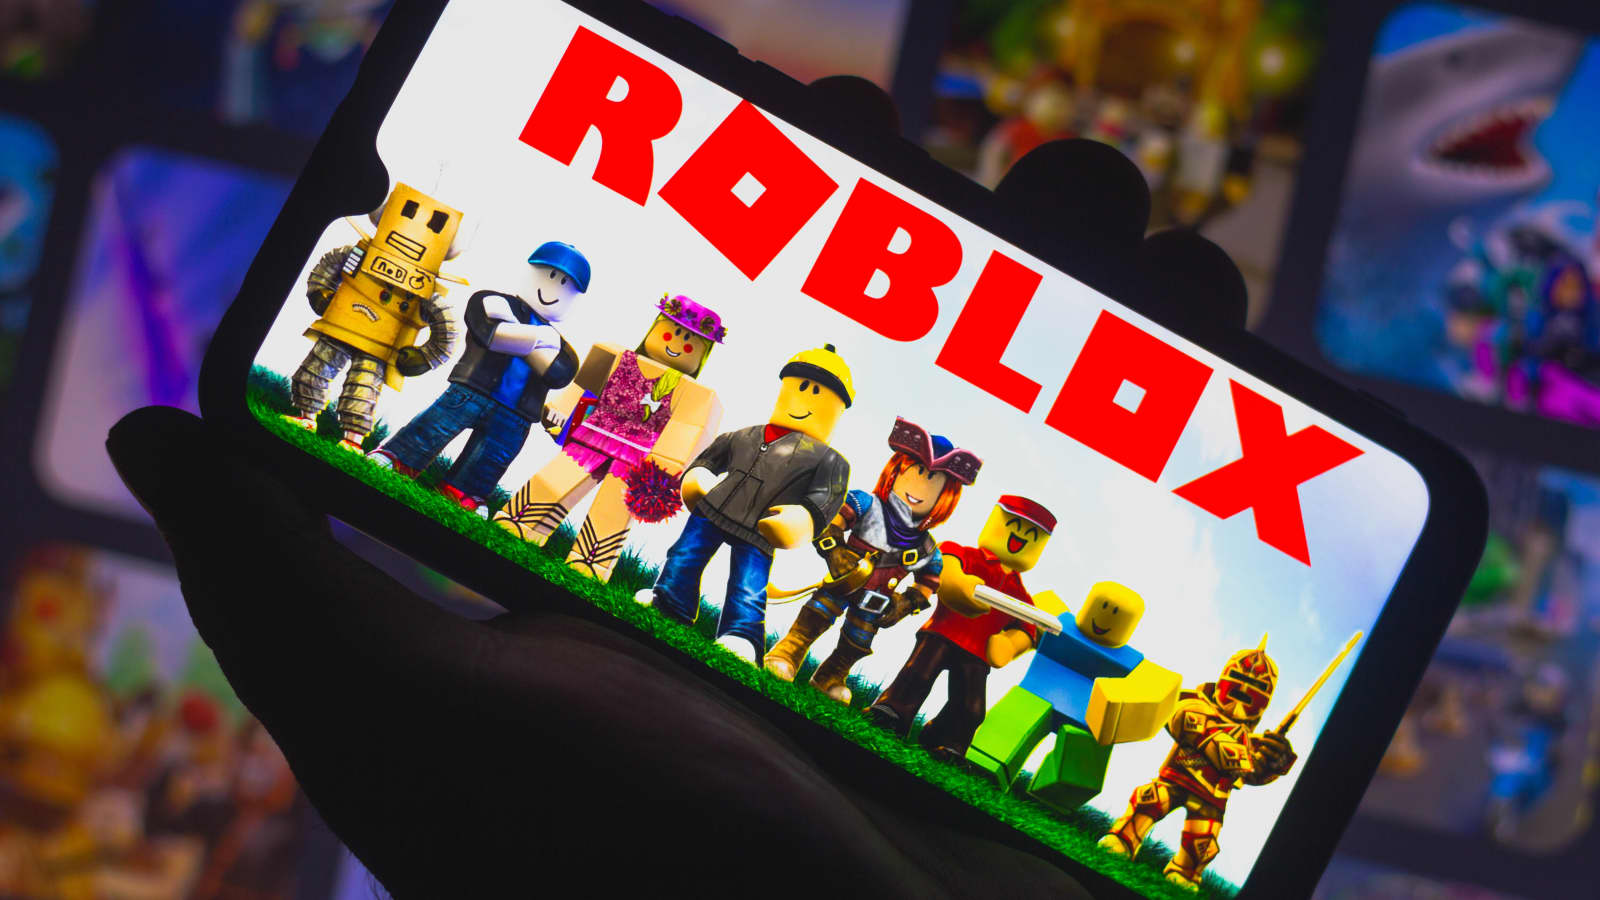 21 devs and creators help make a game with 8-year-old Roblox creator